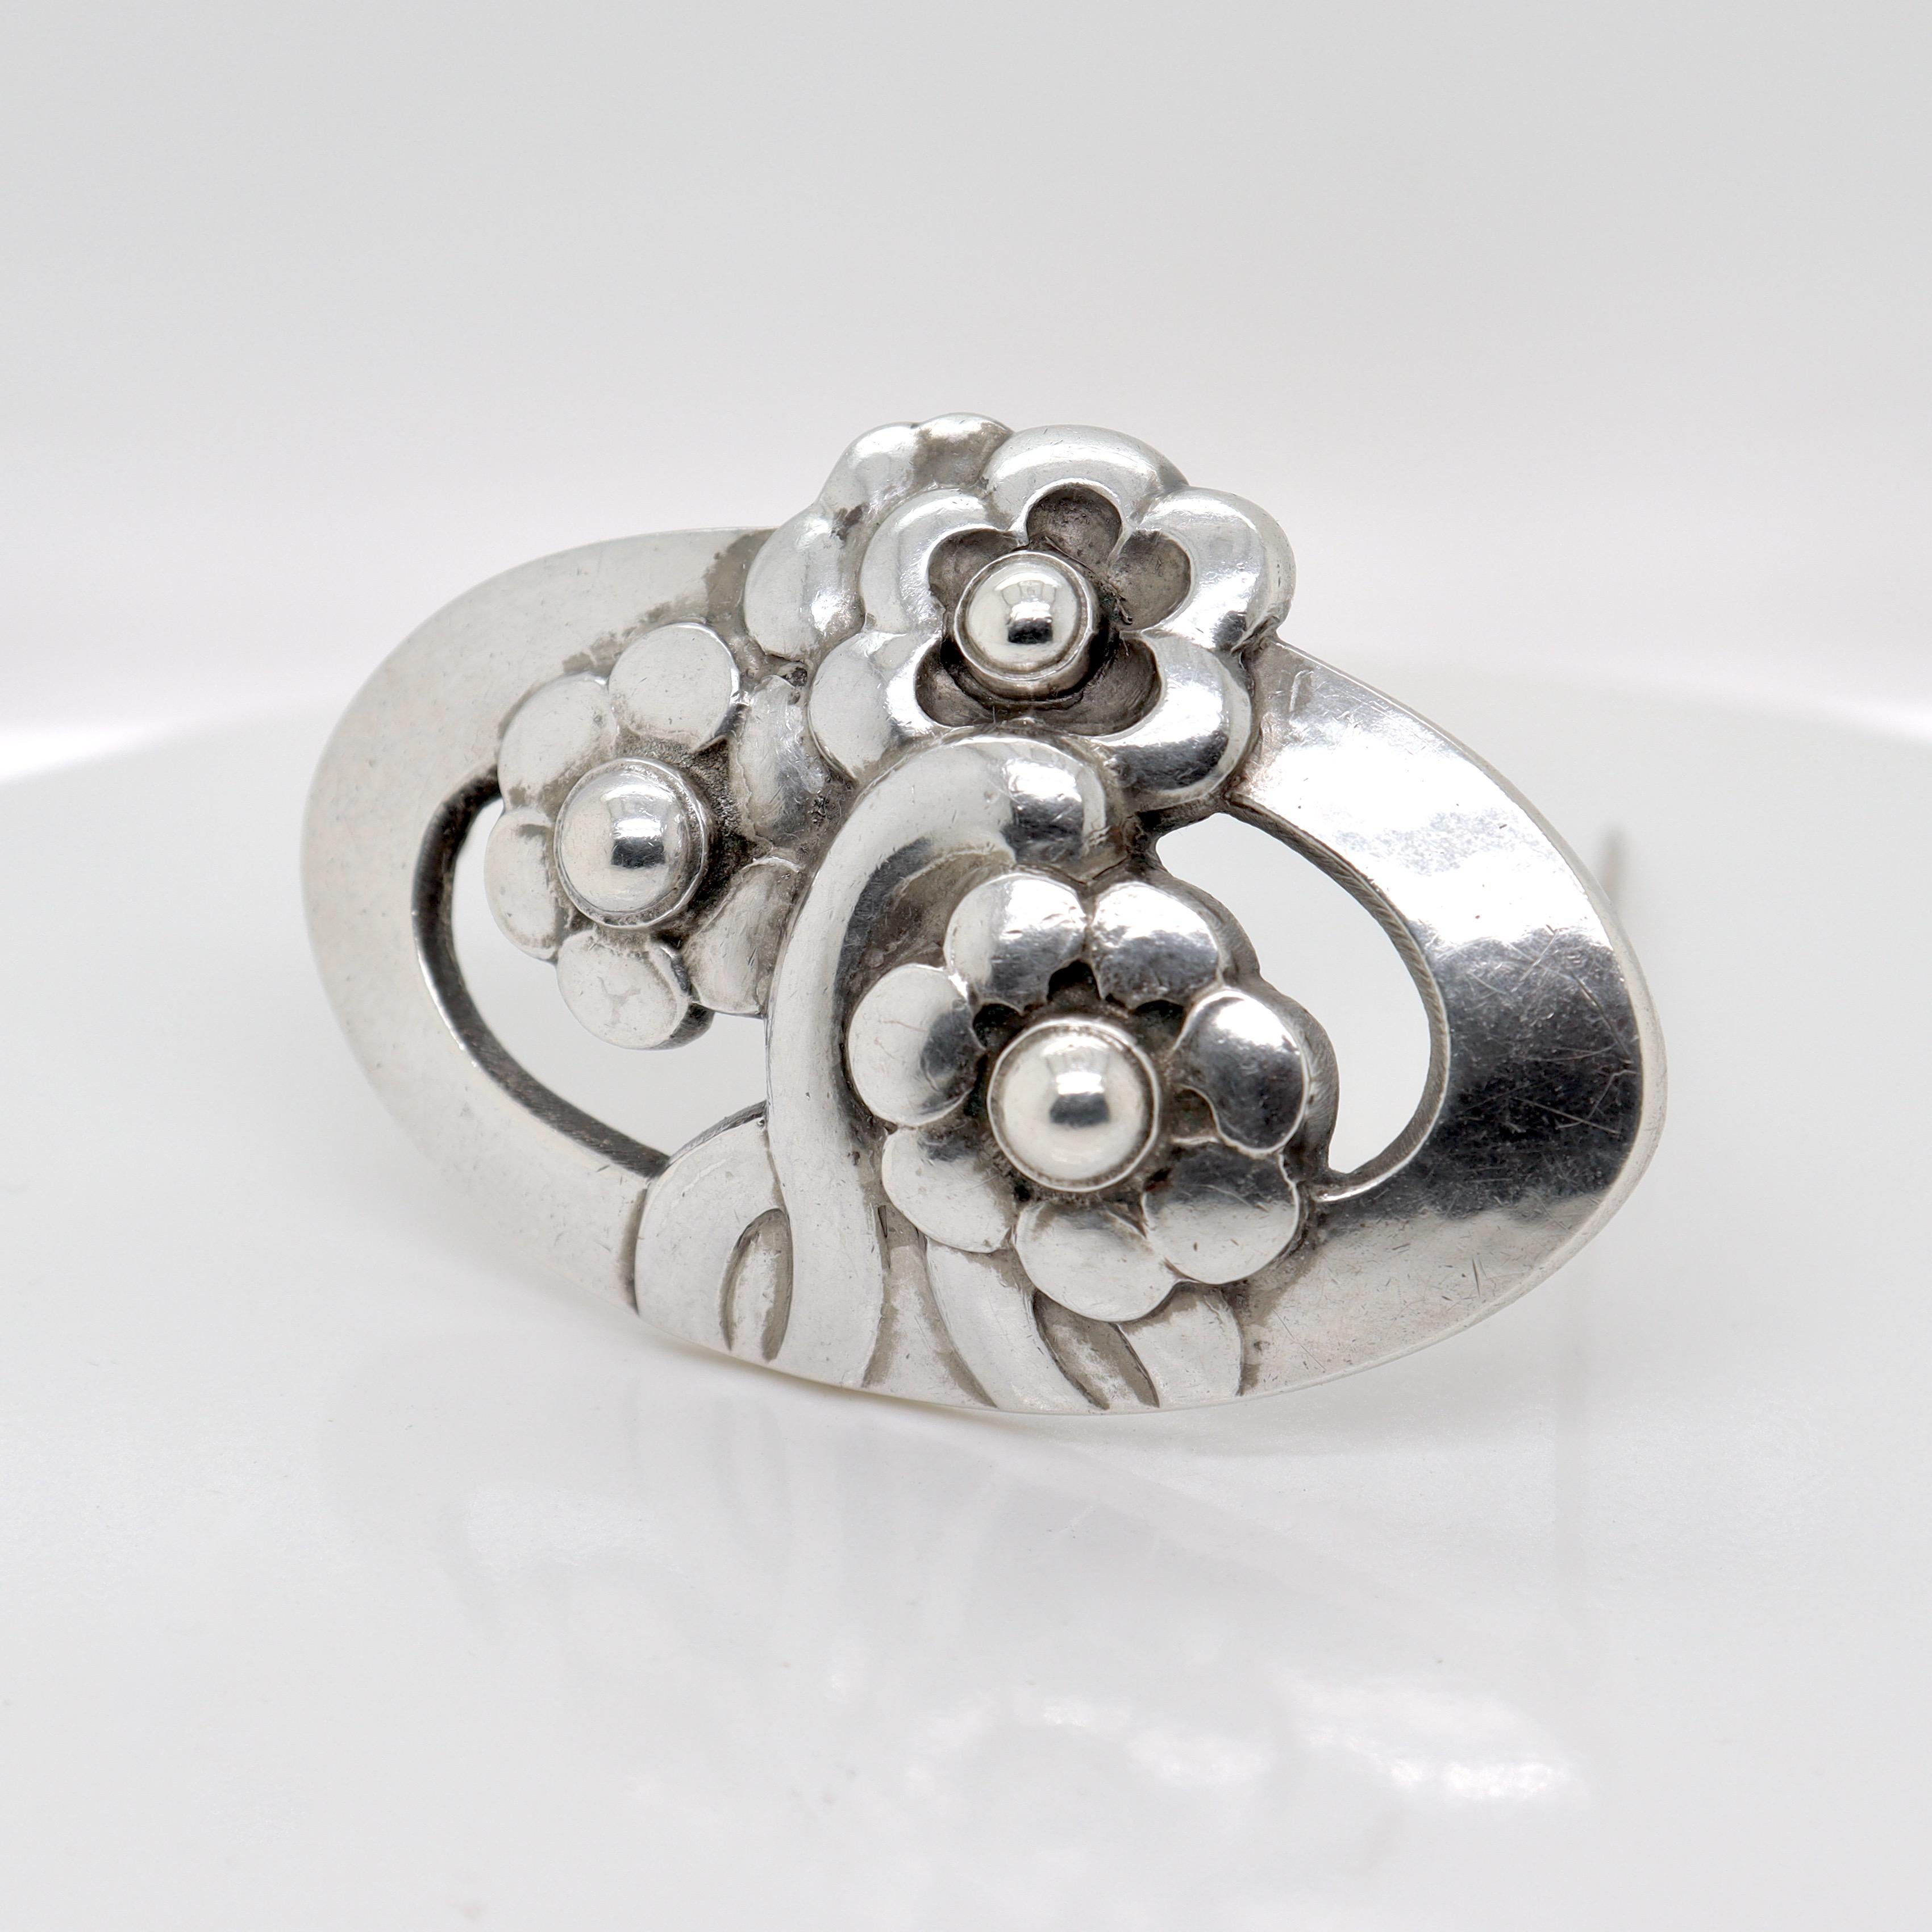 A fine Georg Jensen sterling silver pin or brooch.

Model no. 28.

Designed by Georg Jensen.

In the form of a hand-hammered, stylized flowers.

Simply a wonderful brooch from Denmark's premier silversmiths!

Date:
Early 20th Century,